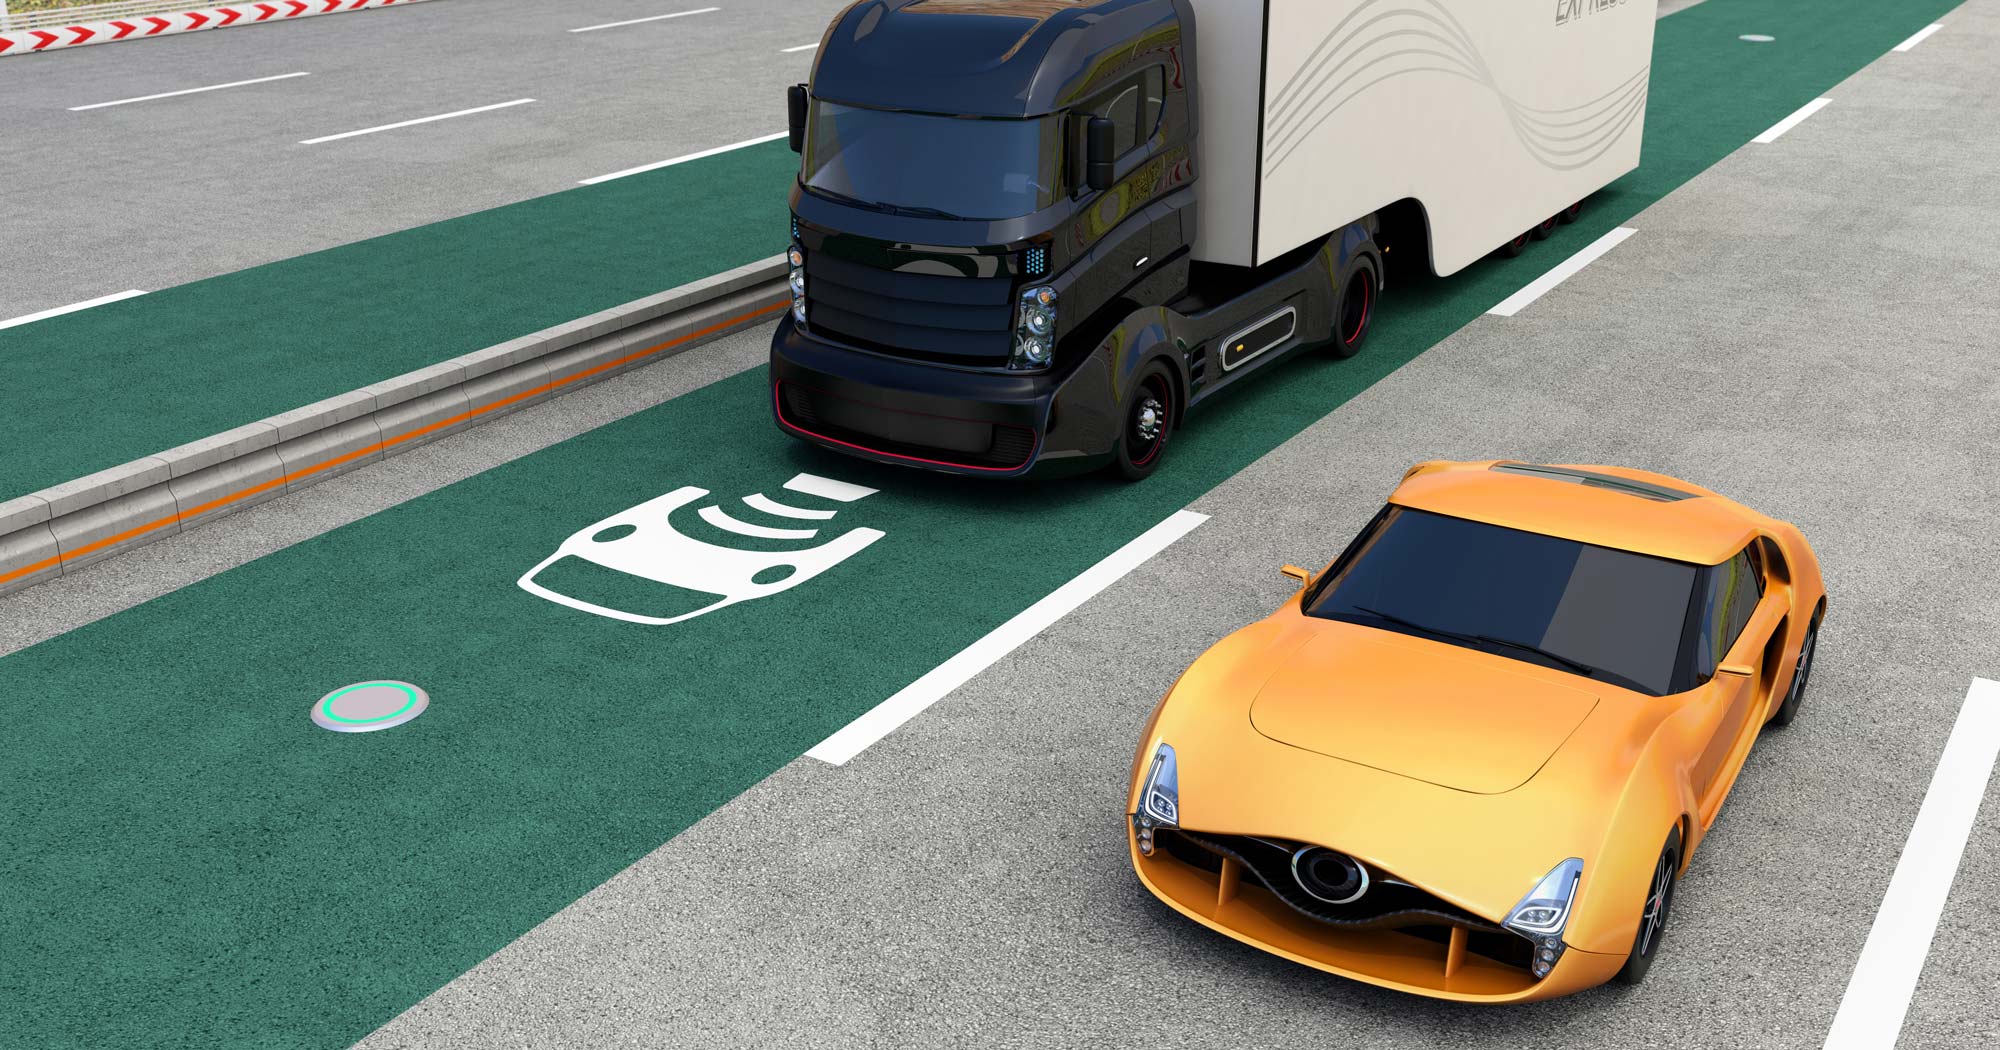 How will wireless dynamic charging of electric vehicles impact the grid